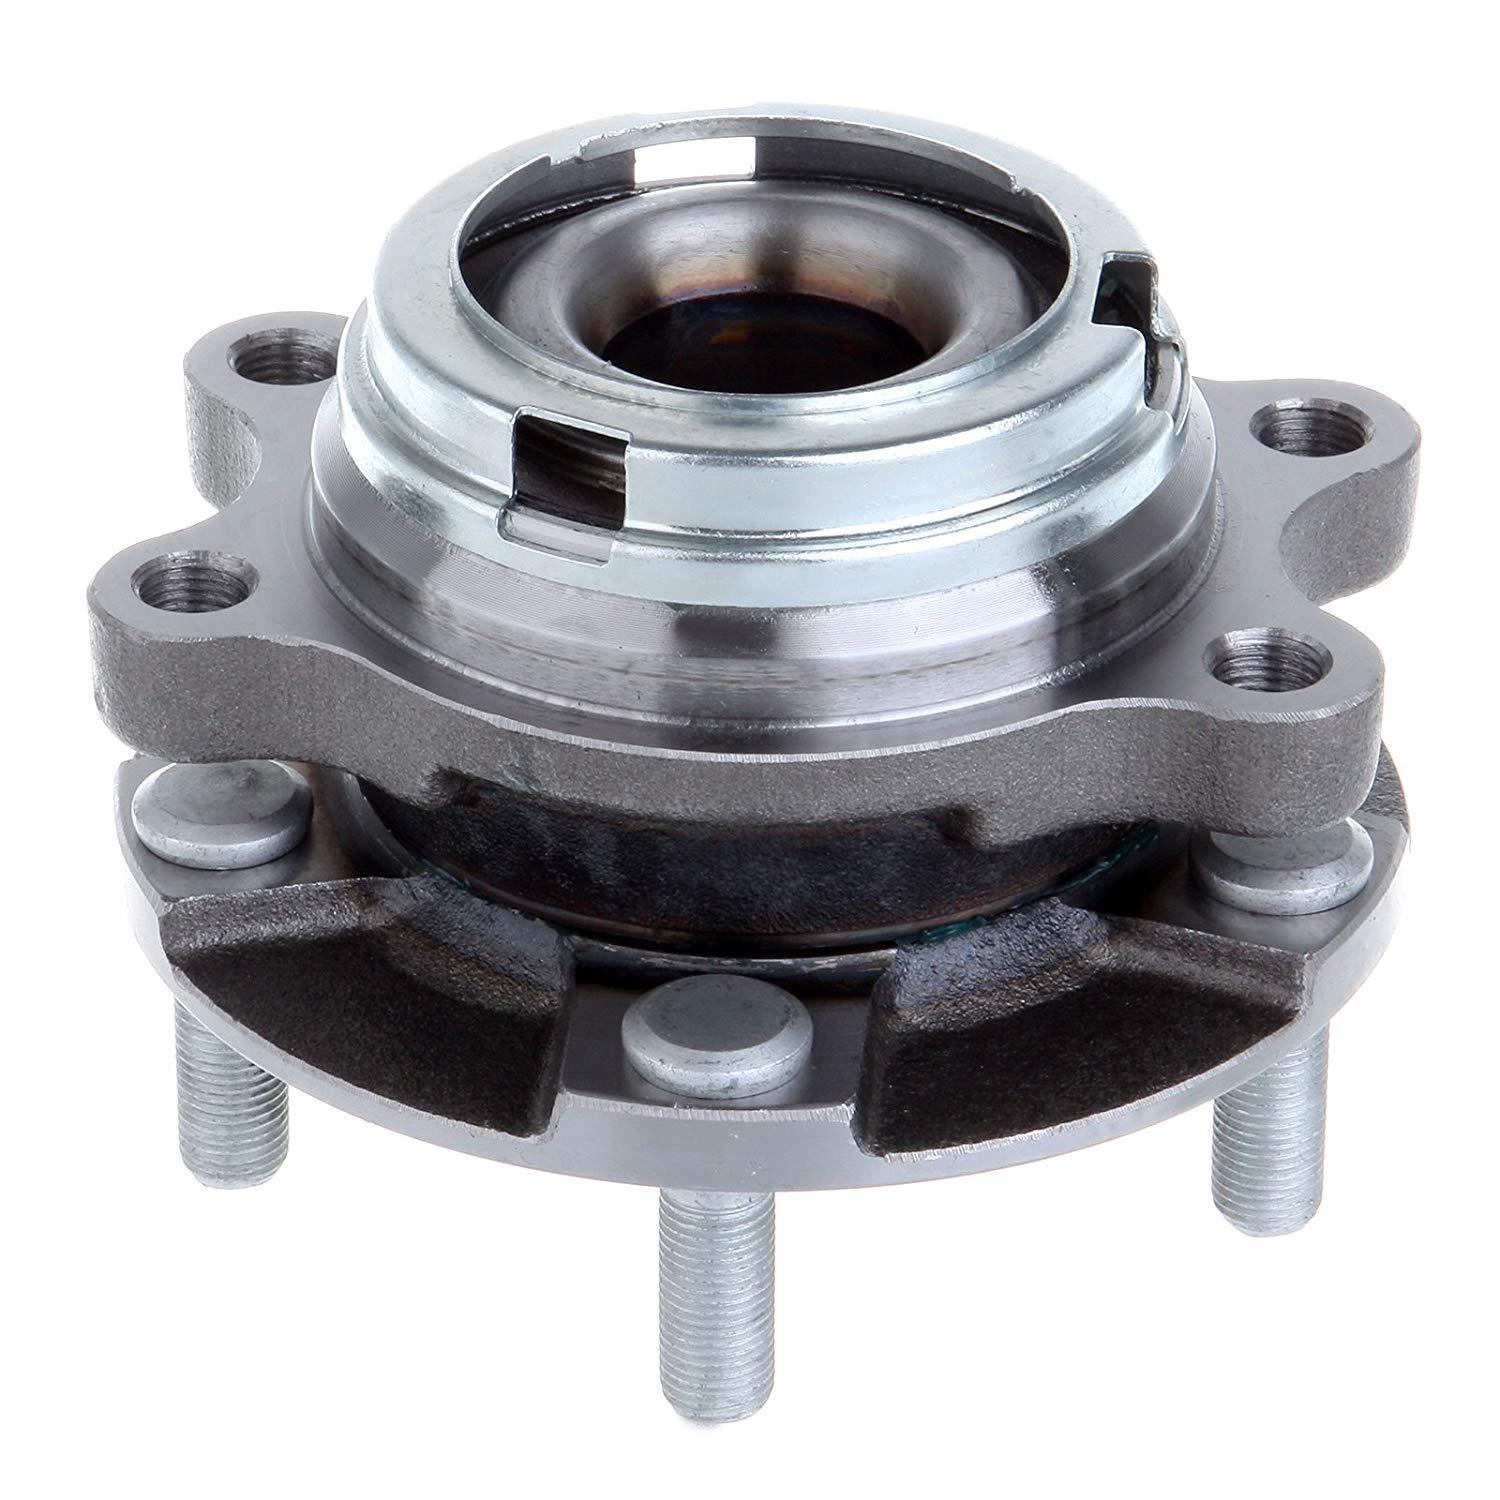 MotorbyMotor HA590125 Front Wheel Bearing and Hub Assembly AWD with 5 Lugs for Infiniti EX35 EX37 FX35 FX37 FX45 FX50 G25 G35 G37 M35 M37 M45 M56 Q40 Q50 Q60 Q70 Q70L QX50 QX70 Hub Bearing Assembly MotorbyMotor